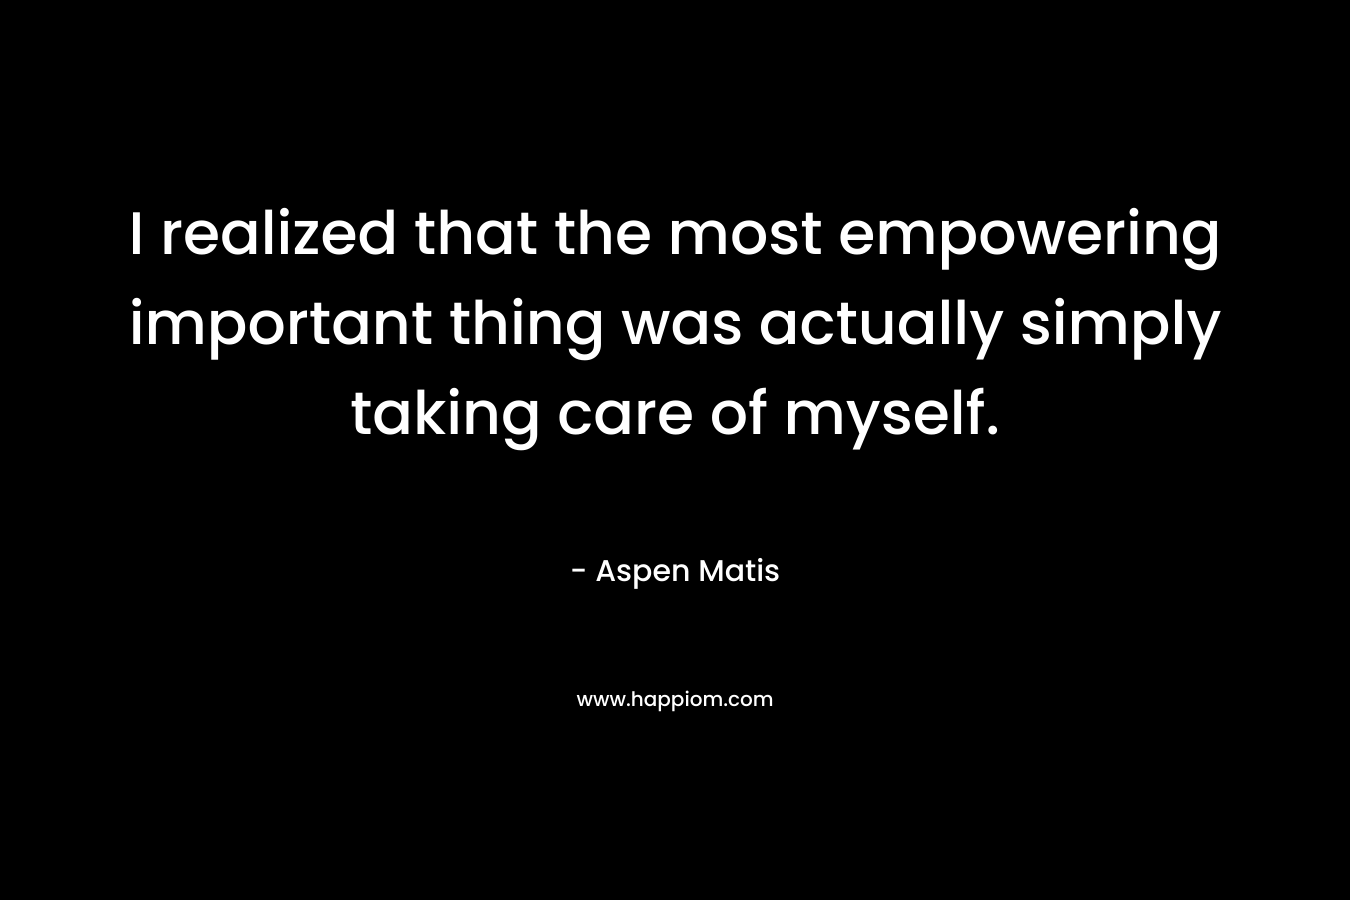 I realized that the most empowering important thing was actually simply taking care of myself.